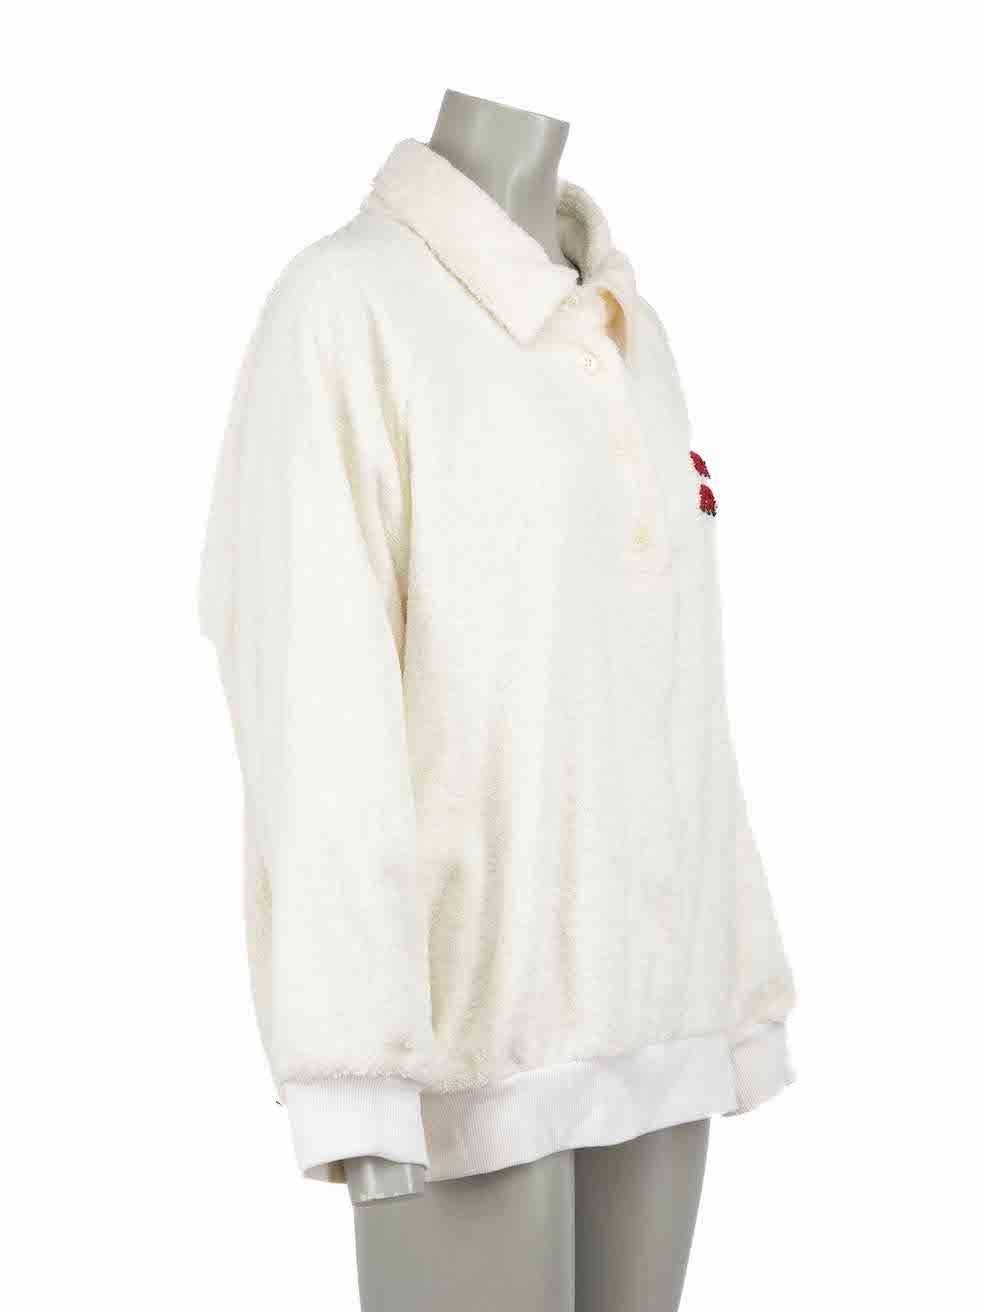 CONDITION is Very good. Hardly any visible wear to jumper is evident on this used Miu Miu designer resale item.
 
Details
White
Cotton
Oversized sweatshirt
Terry cloth texture
Logo embroidery on front and back
Polo collar
Front quarter button up